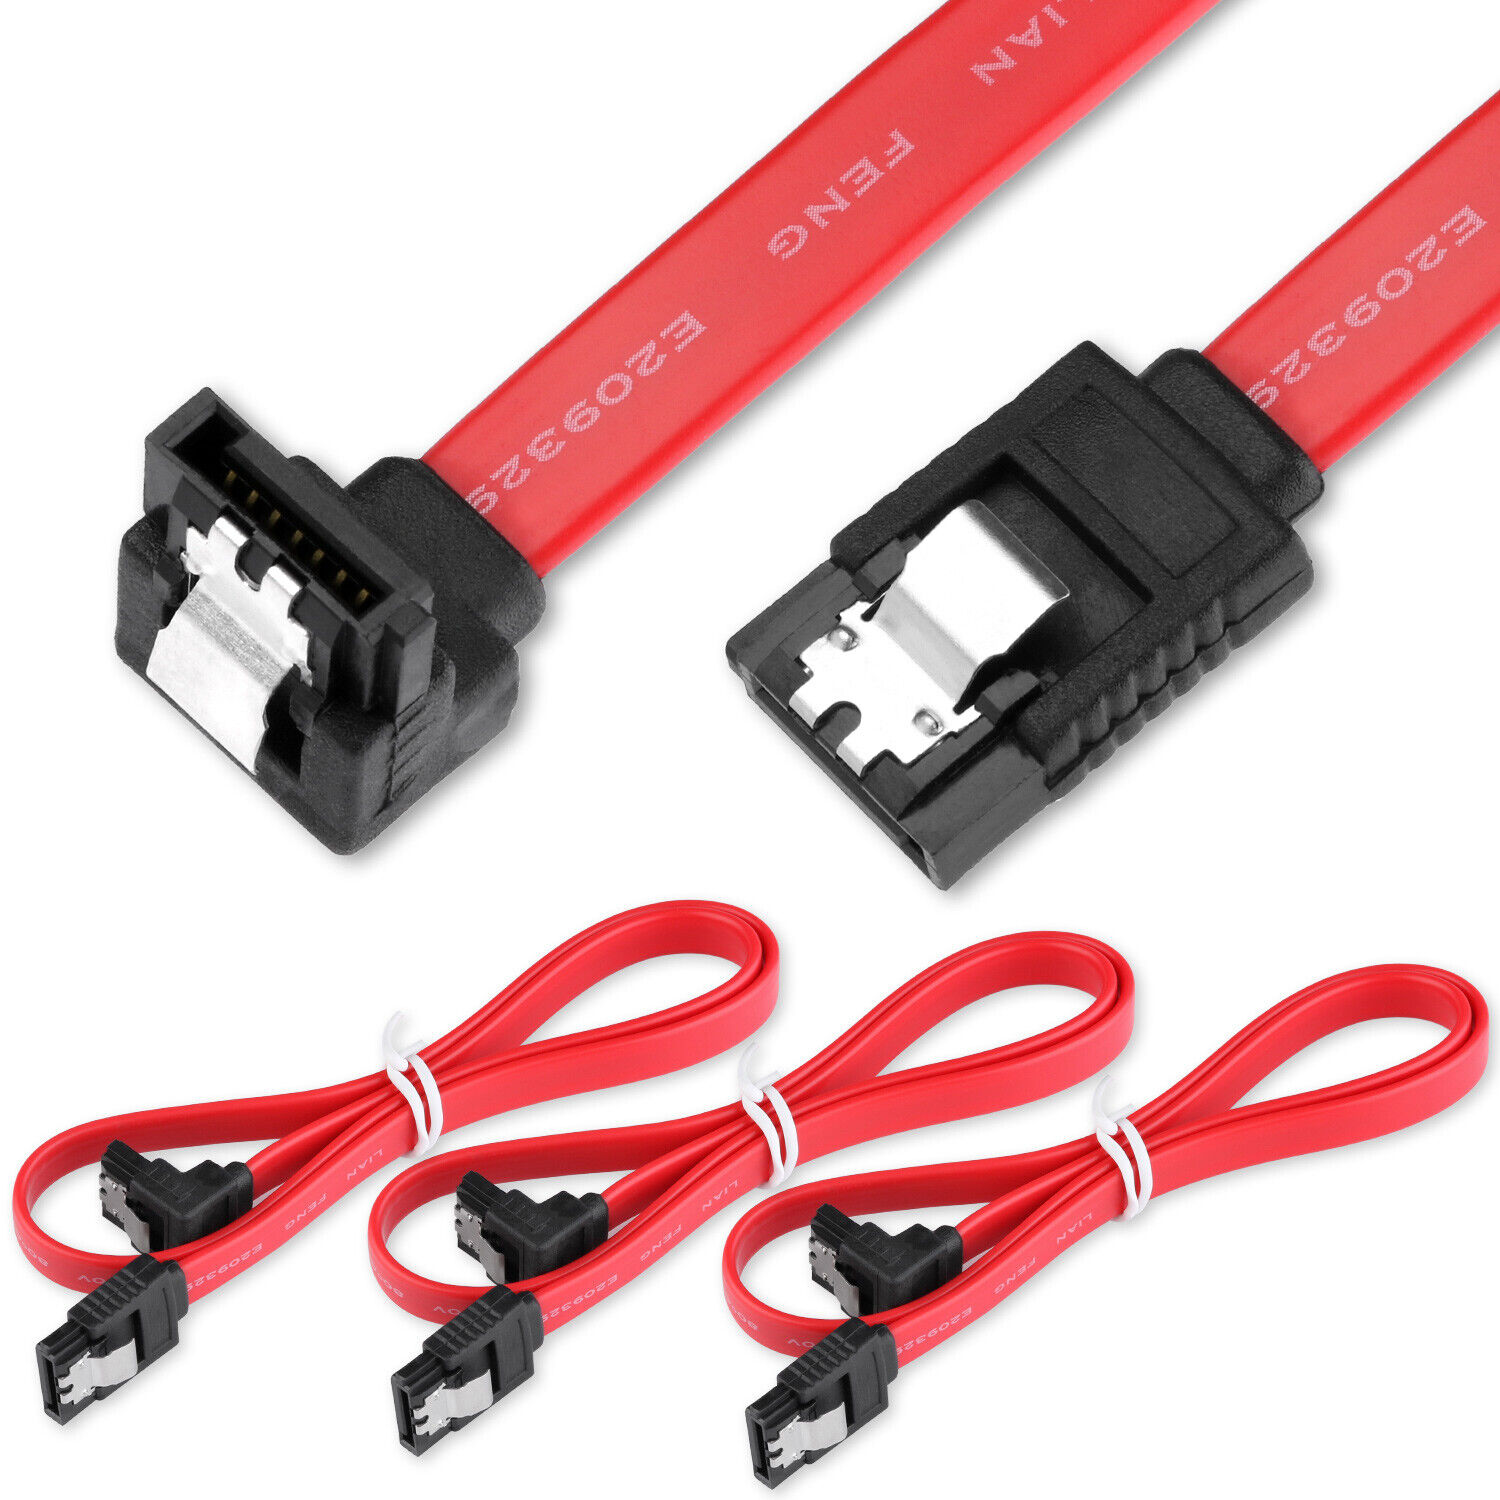 3 Pack 18 inch SATA Cable III 6Gbps 90 Degree Right Angle HDD Data Cord w/Latch